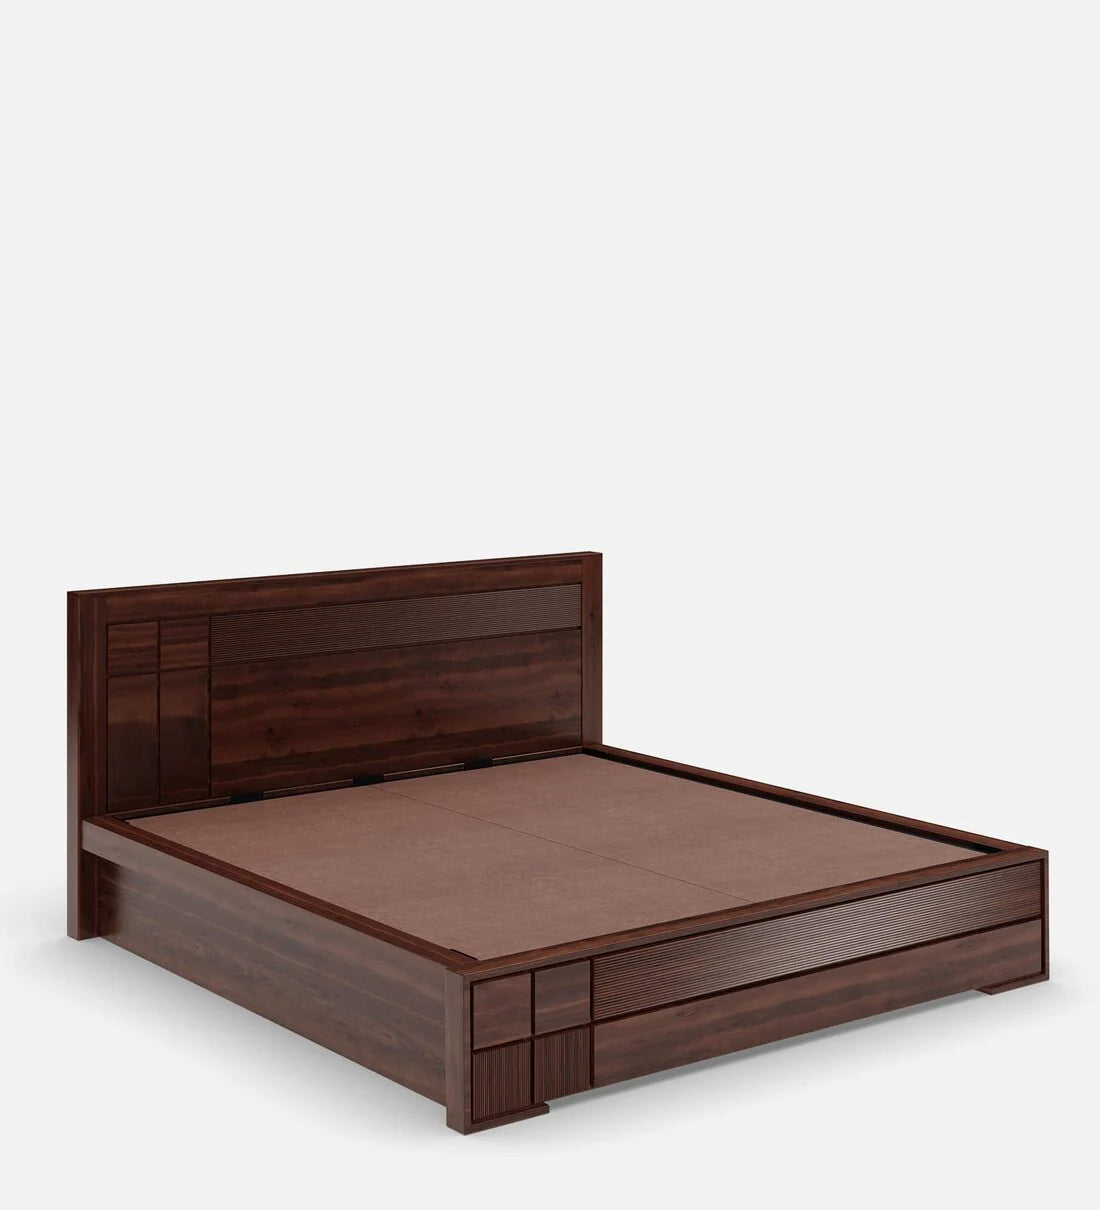 Sheesham Wood King Size Bed in Brown Colour With Hydraulic Storage